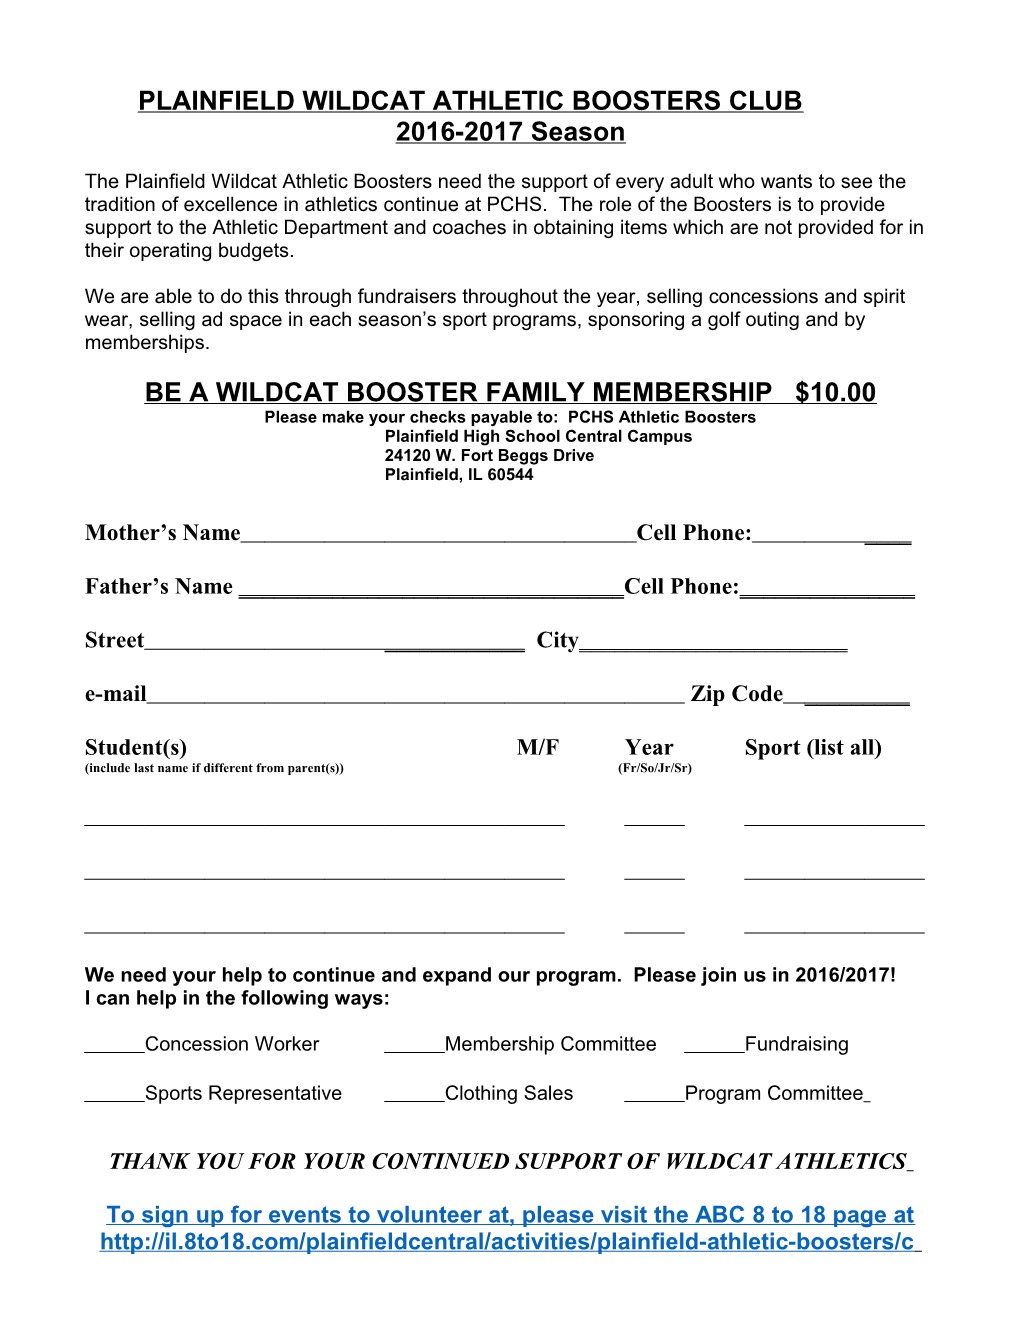 Plainfield Wildcat Athletic Boosters Club